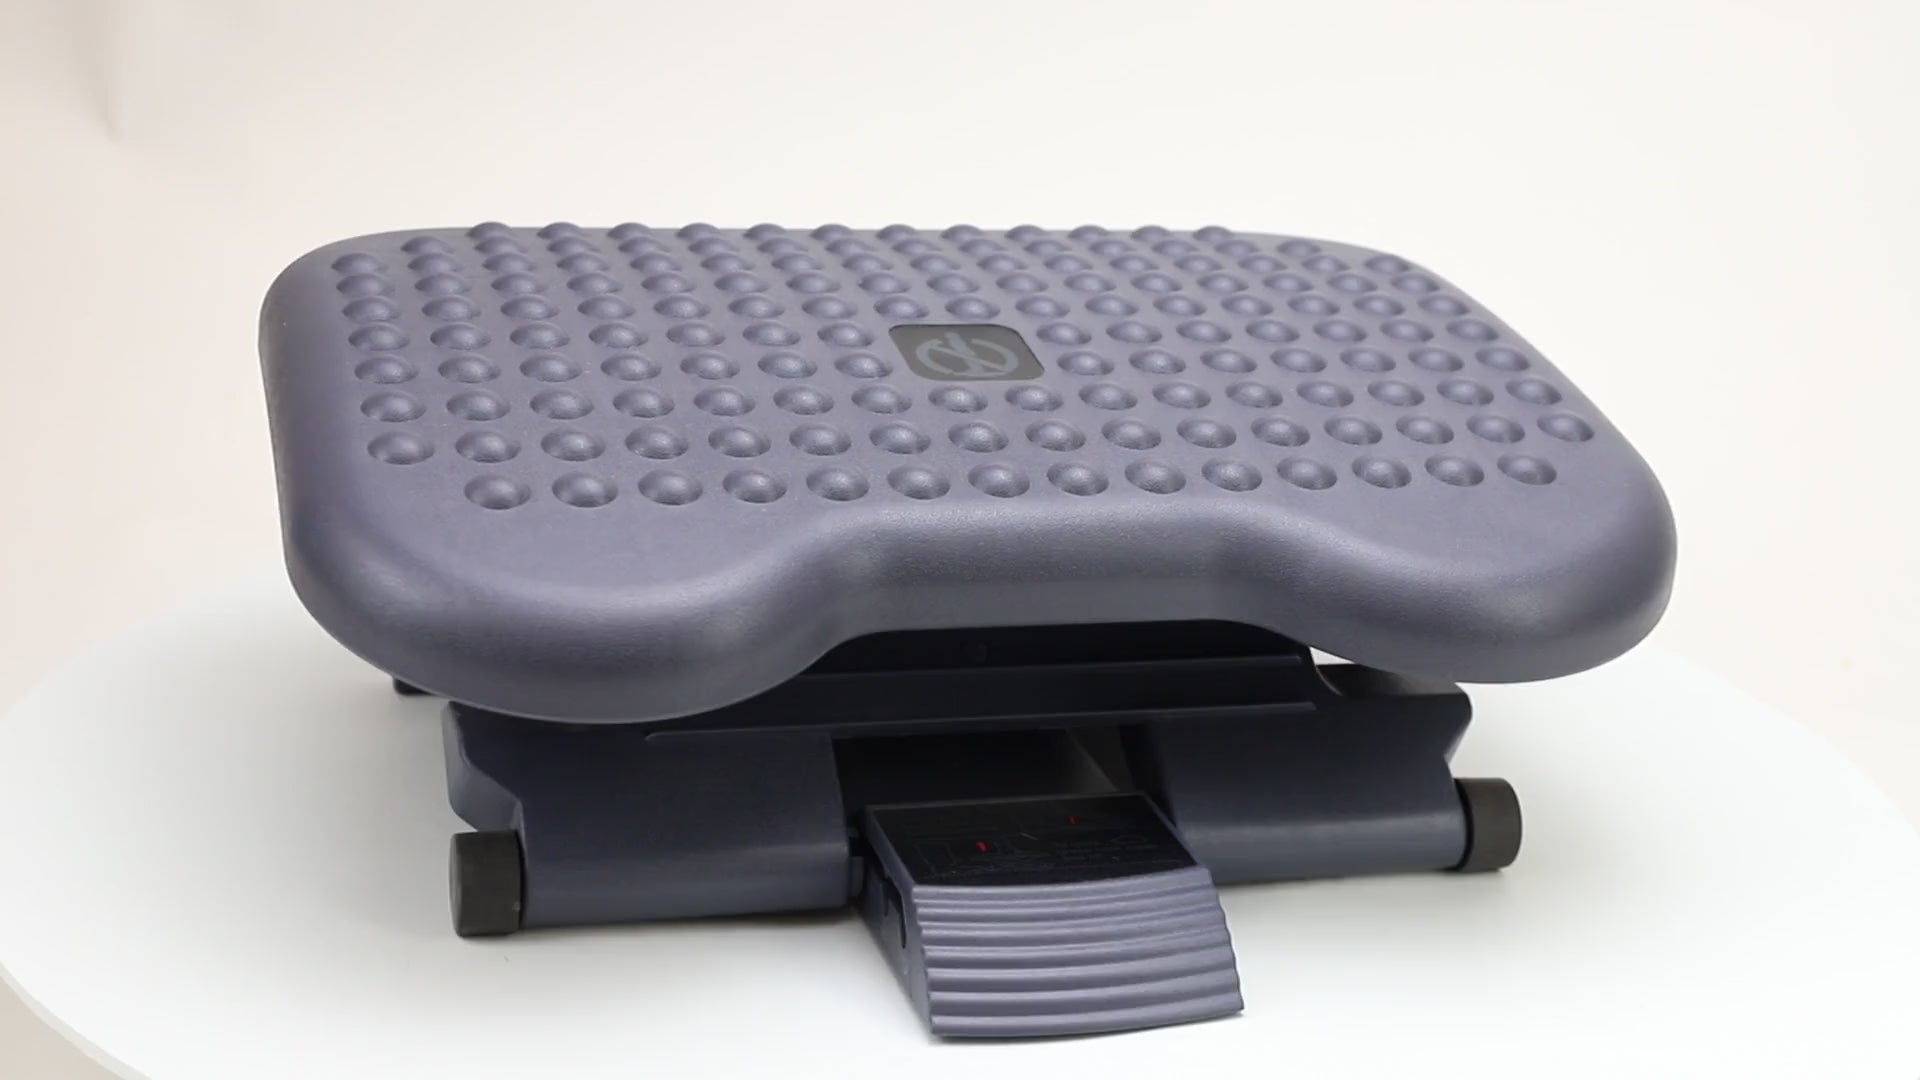 Slip this mat under your desk and get a foot massage while you work